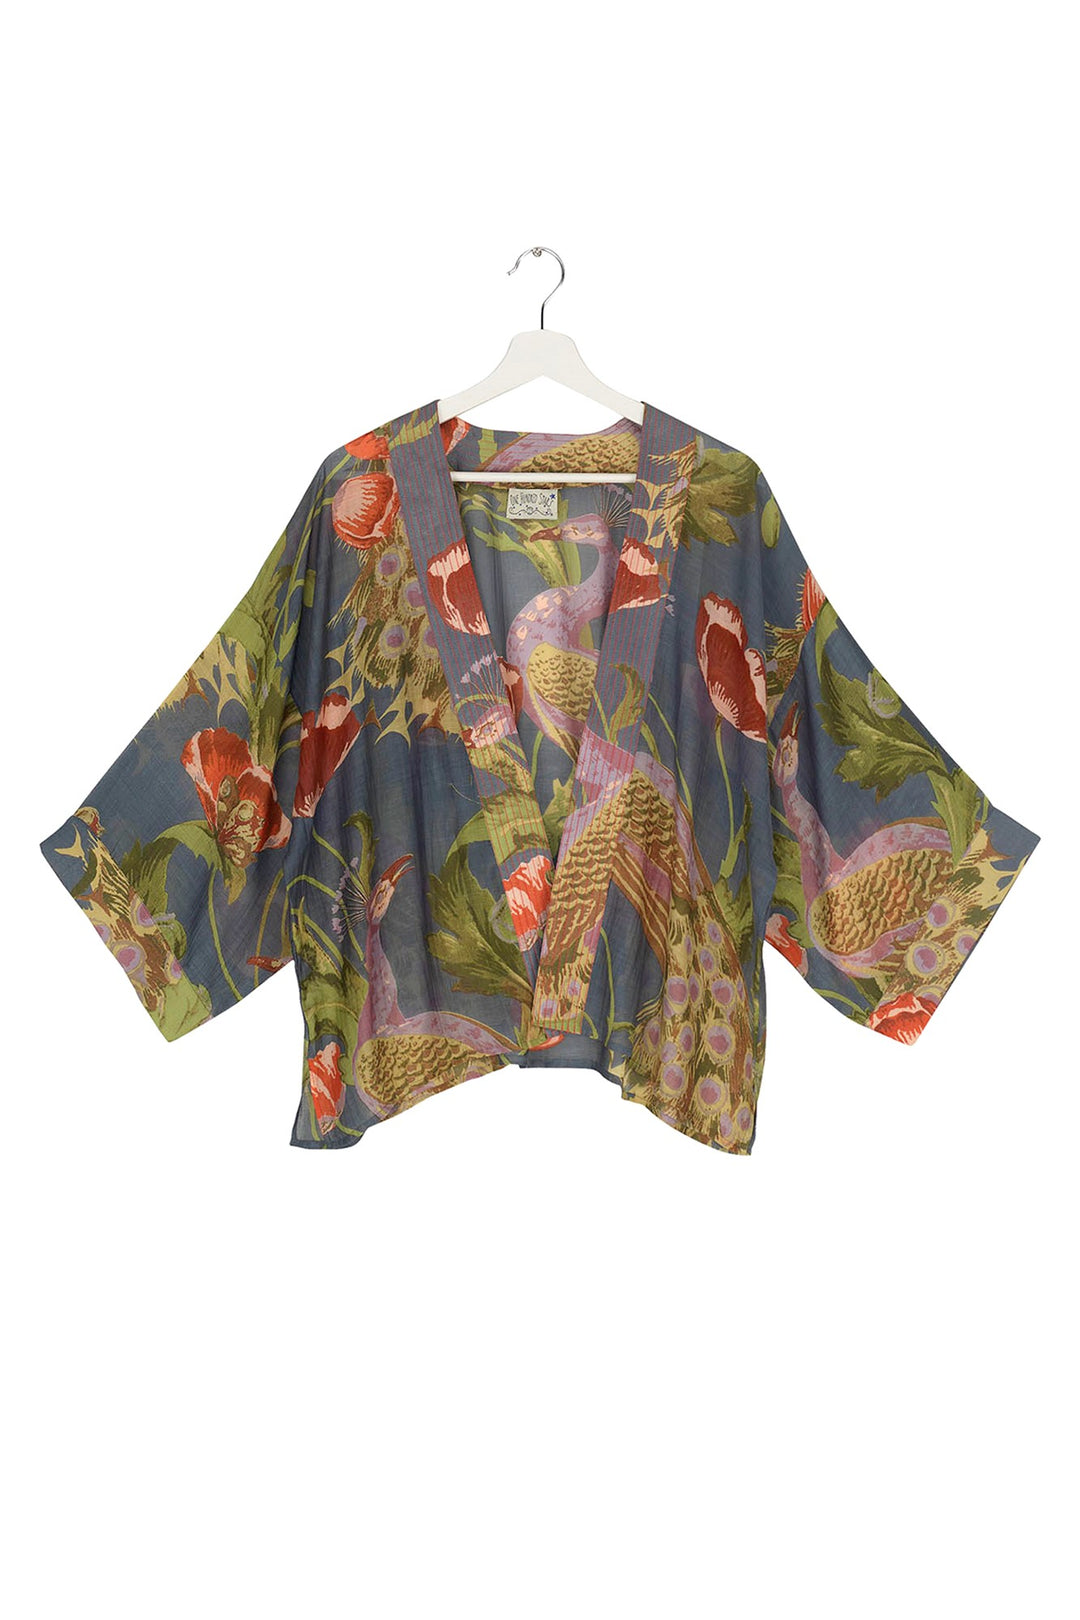 One Hundred Stars Peacock and Poppies Grey Kimono- Our bestselling kimono jackets have loose ¾ length sleeves, an open front and a lightly embroidered lapel. Pair with a matching camisole and your favourite jeans in summer or layer over a polo neck during the cooler months.